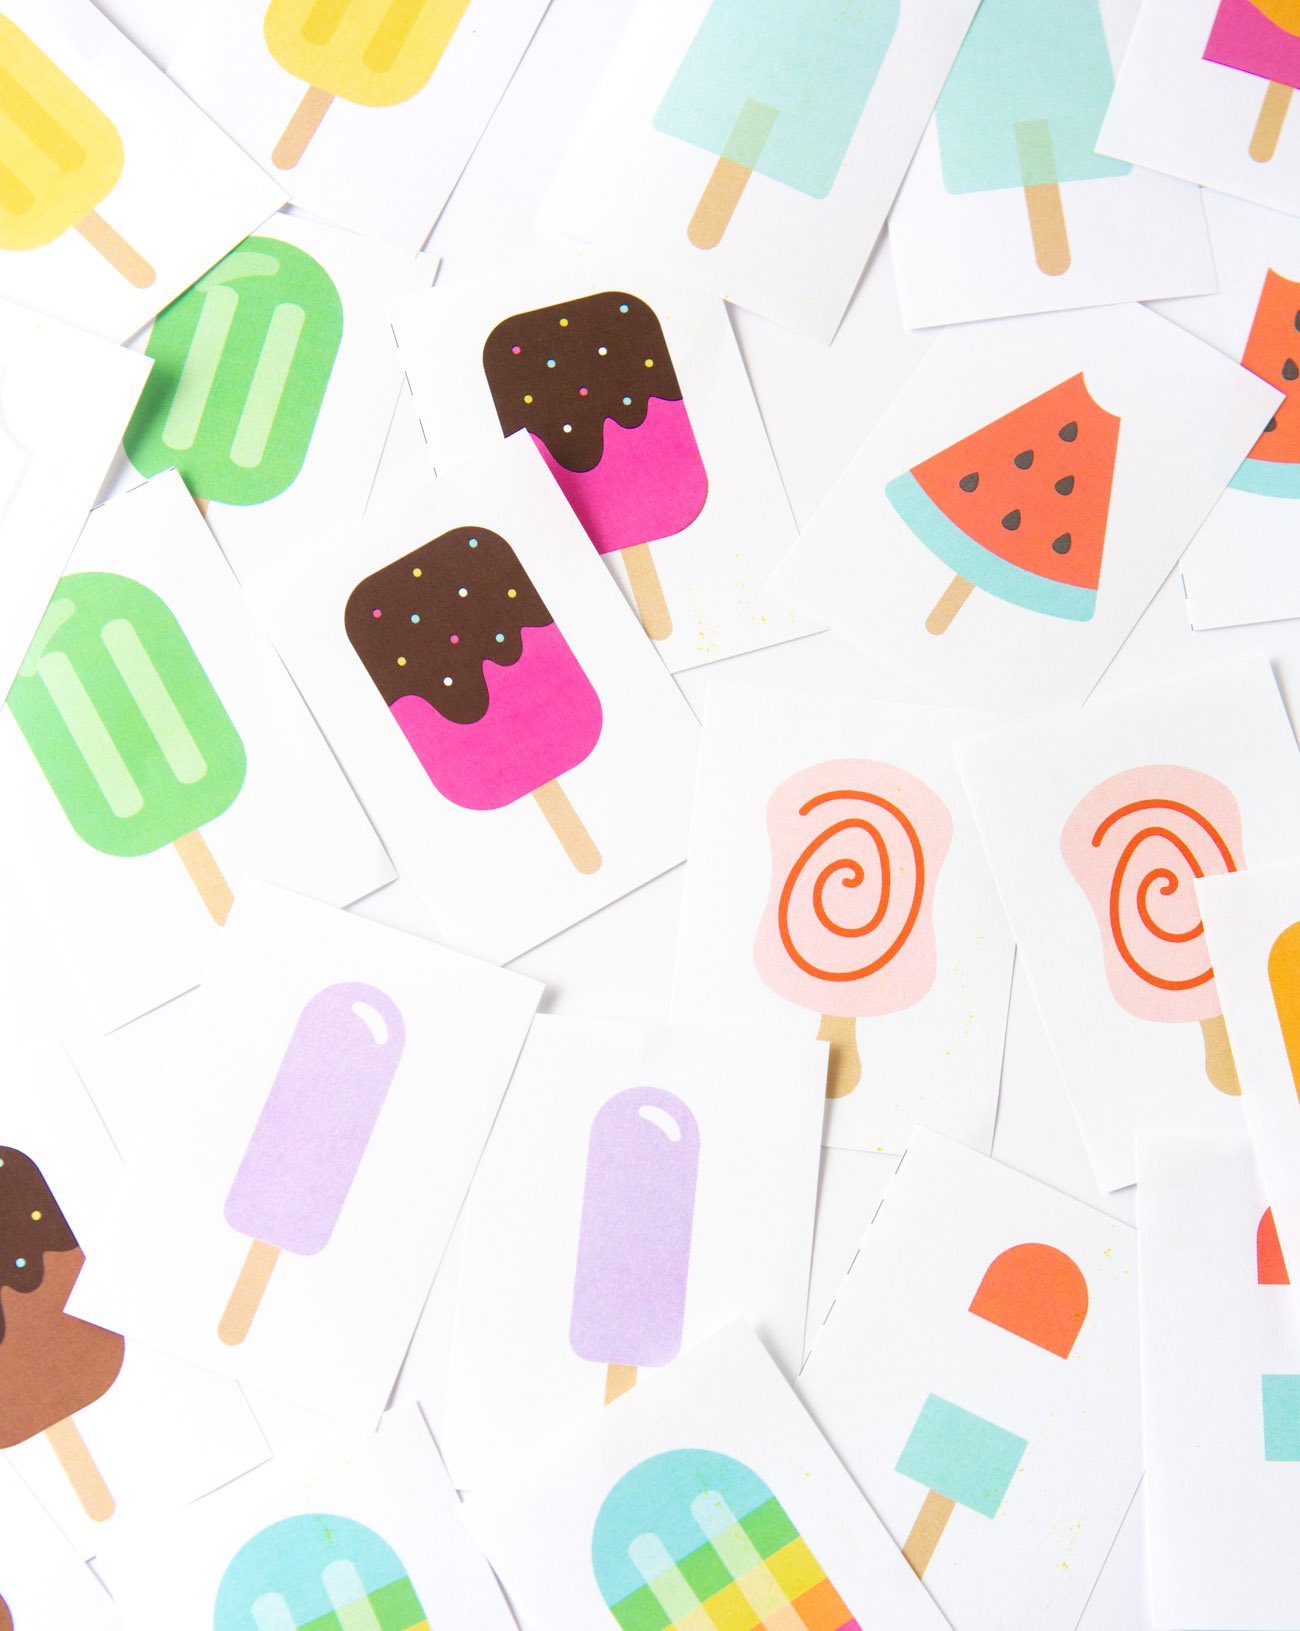 Messy arrangement of popsicle printable memory cards